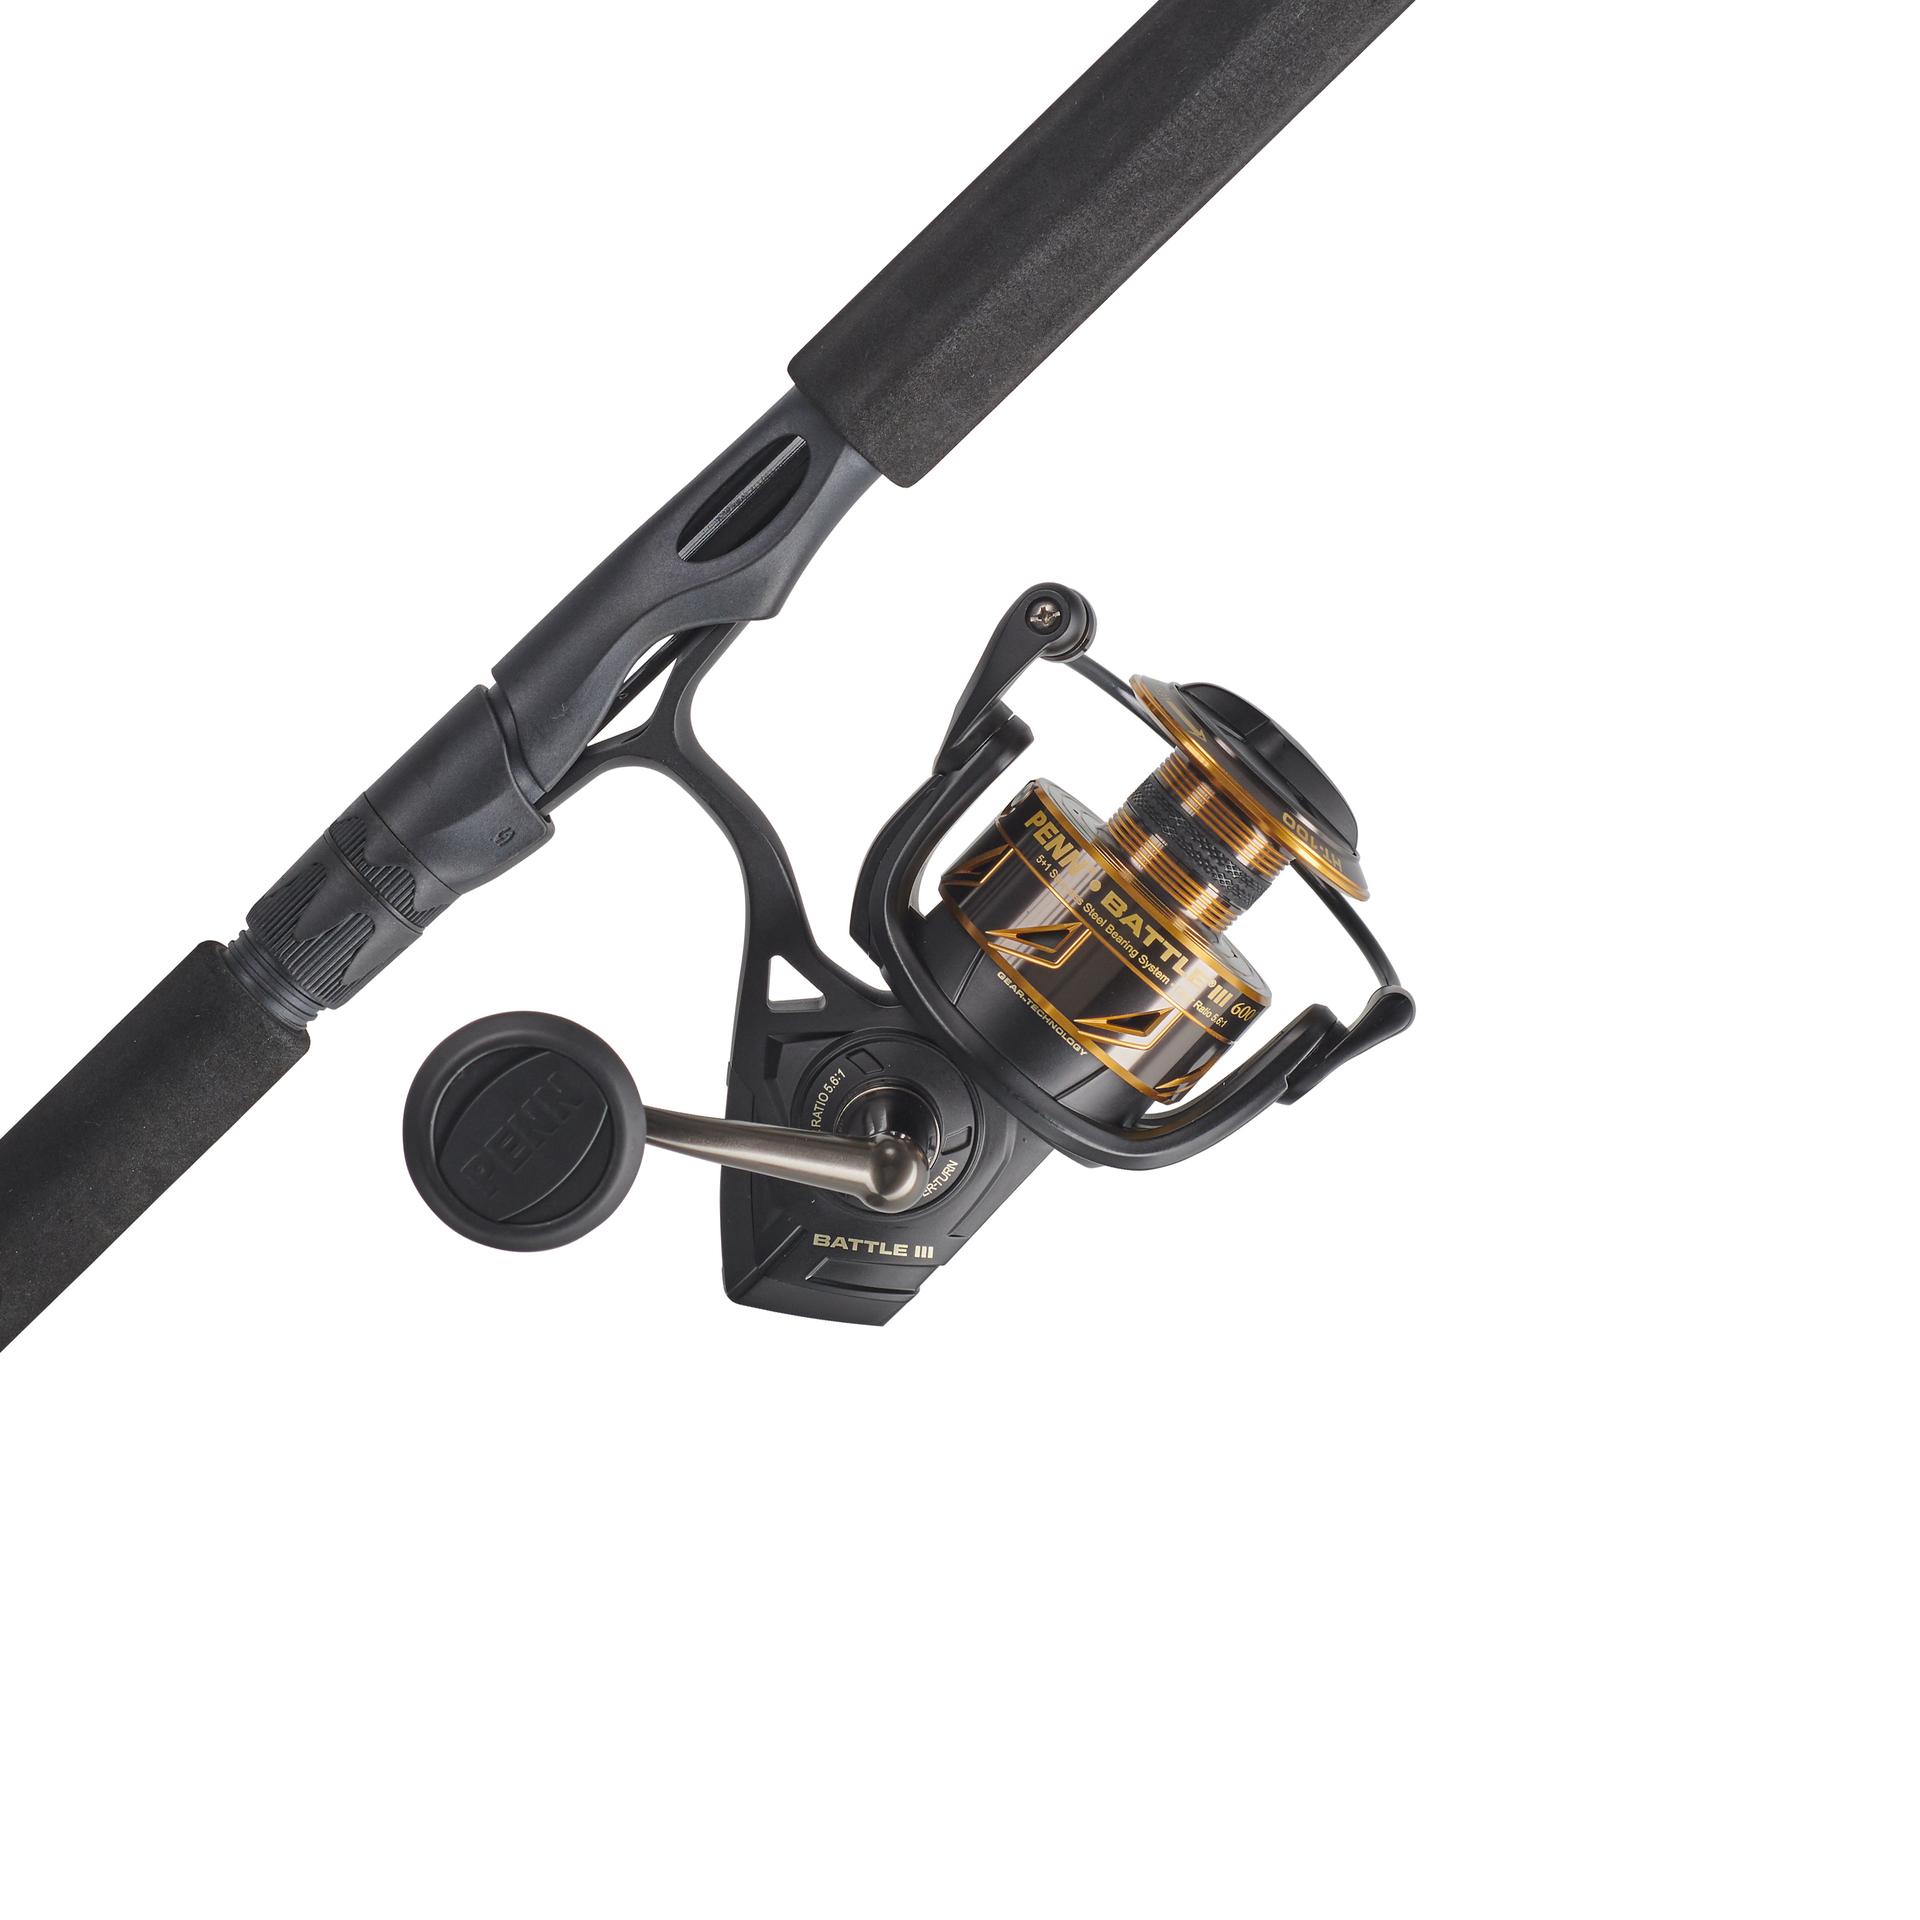 Bass Pro Shops Crappie Maxx Spinning Rod and Reel Combo - 5'6